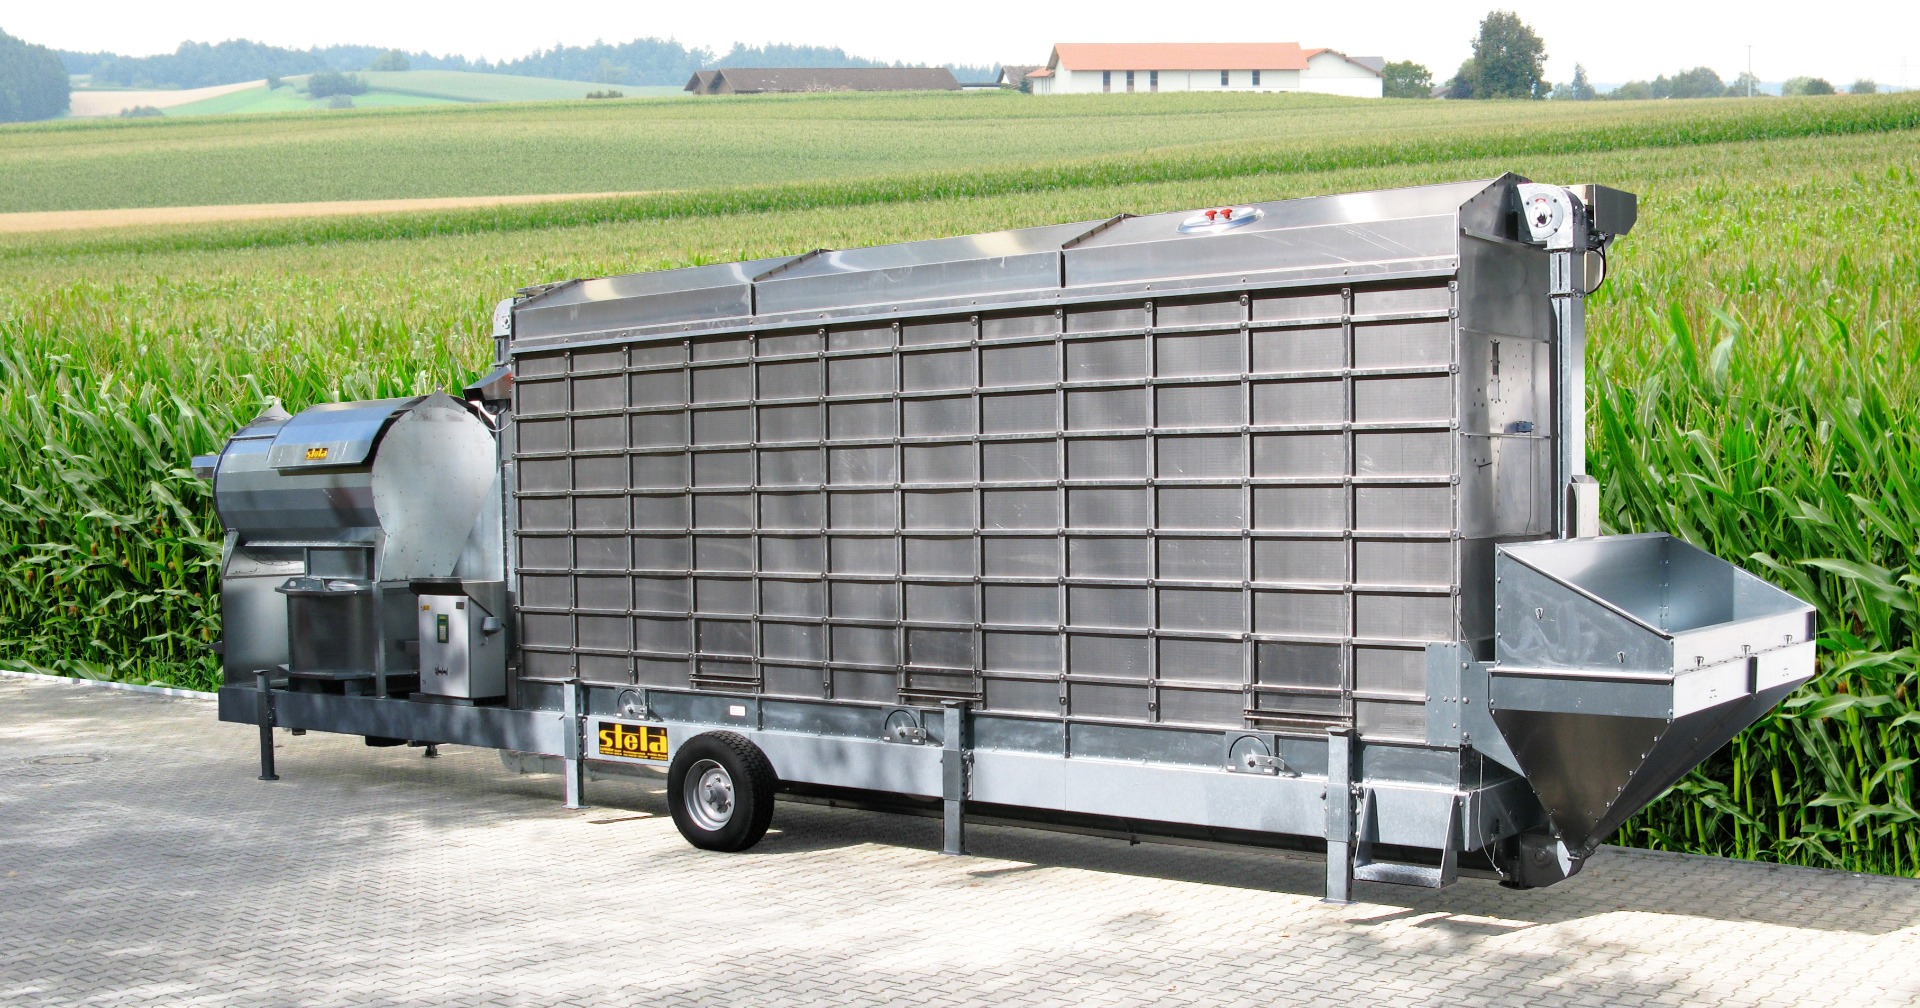 Mobile maize dryer <br>STELA MUF